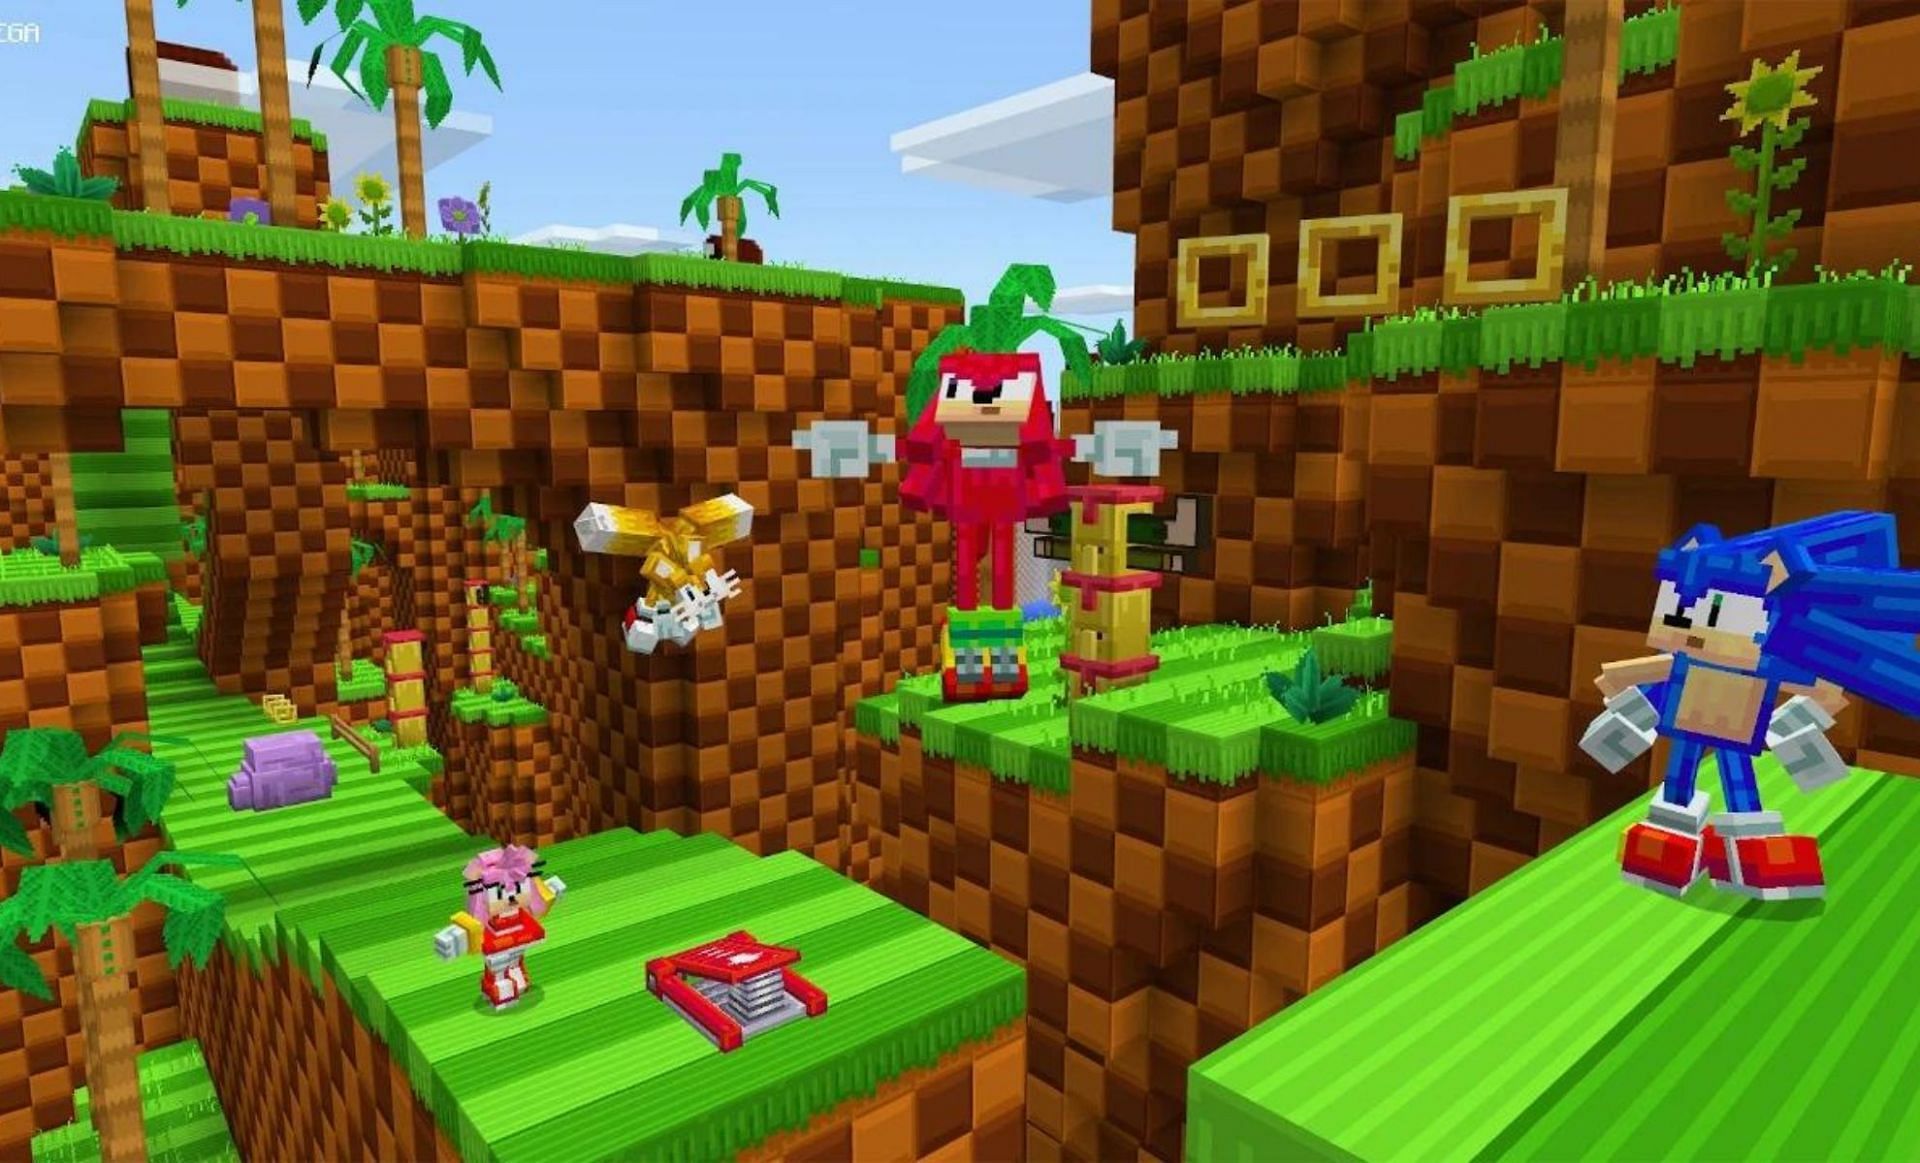 The Sonic the Hedgehog DLC map is available in the Adventure Mode (Image via Mojang)